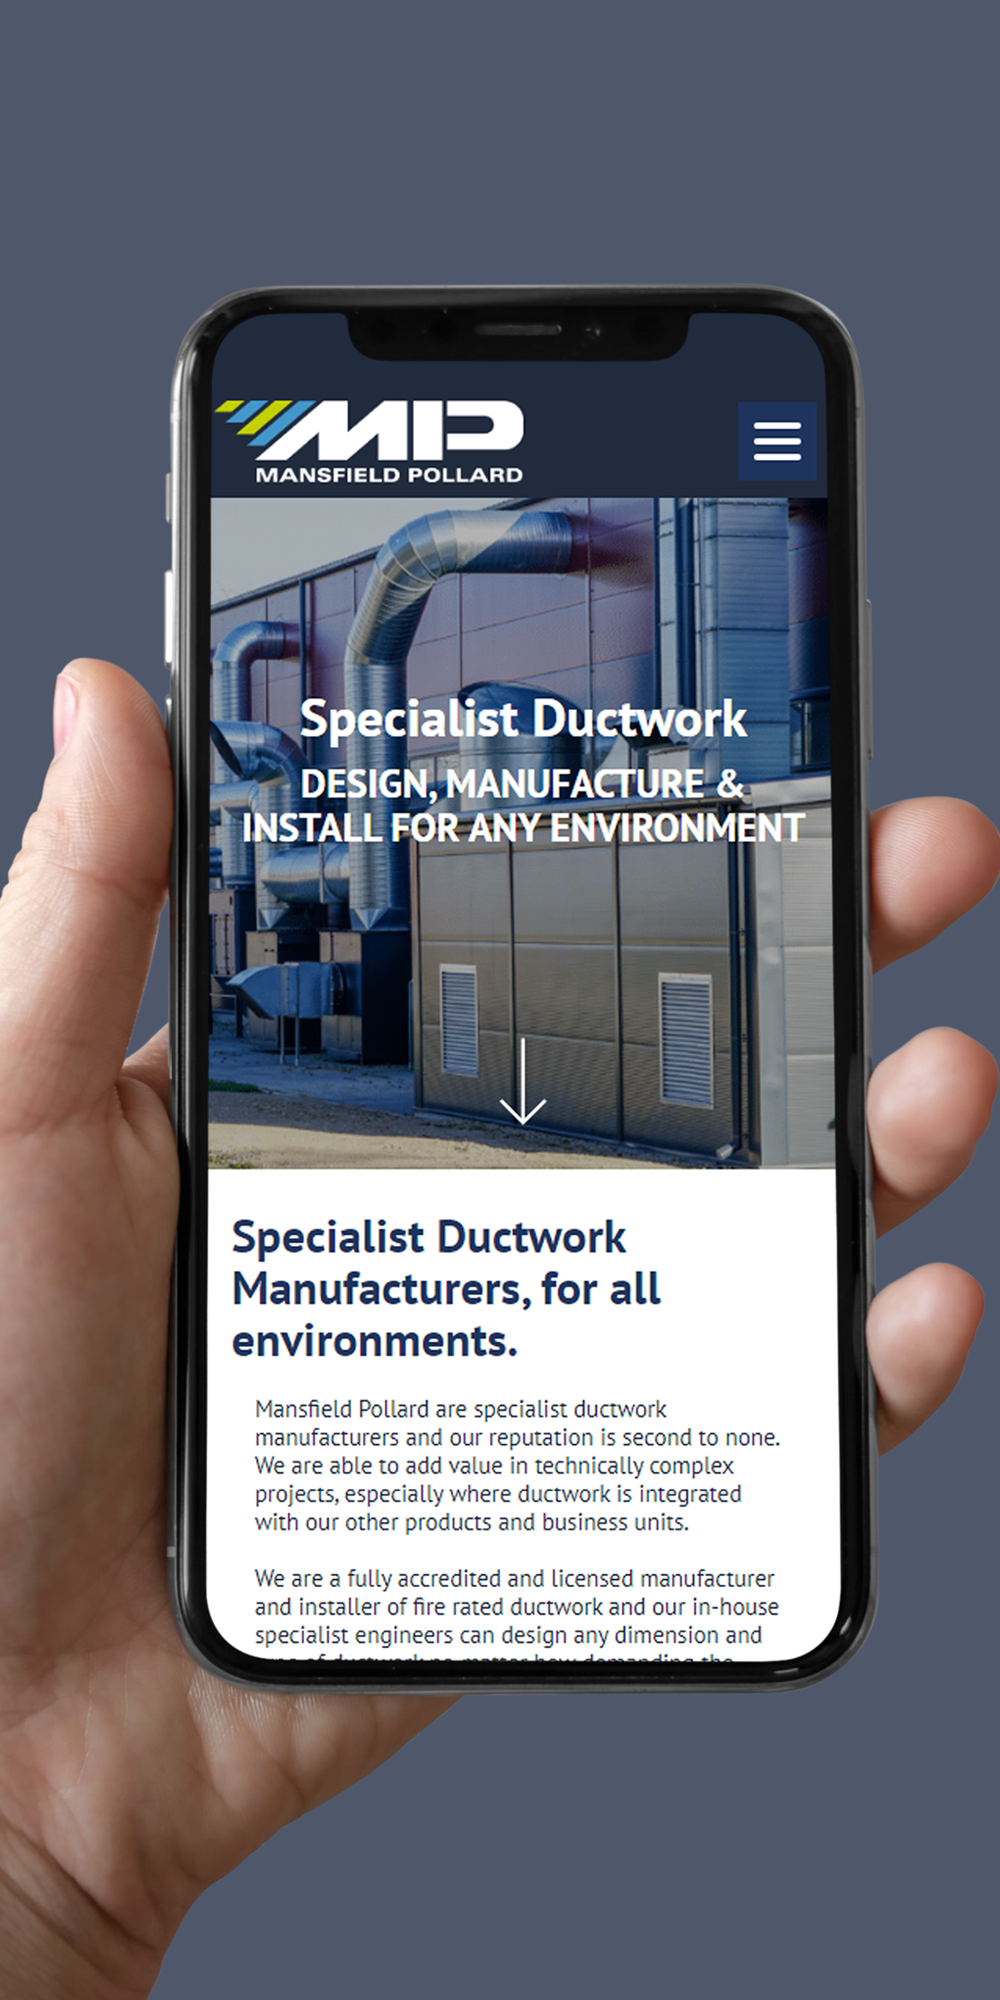 Phone screen being held in a hand, showing MP's logo and the Specialist Ductwork page